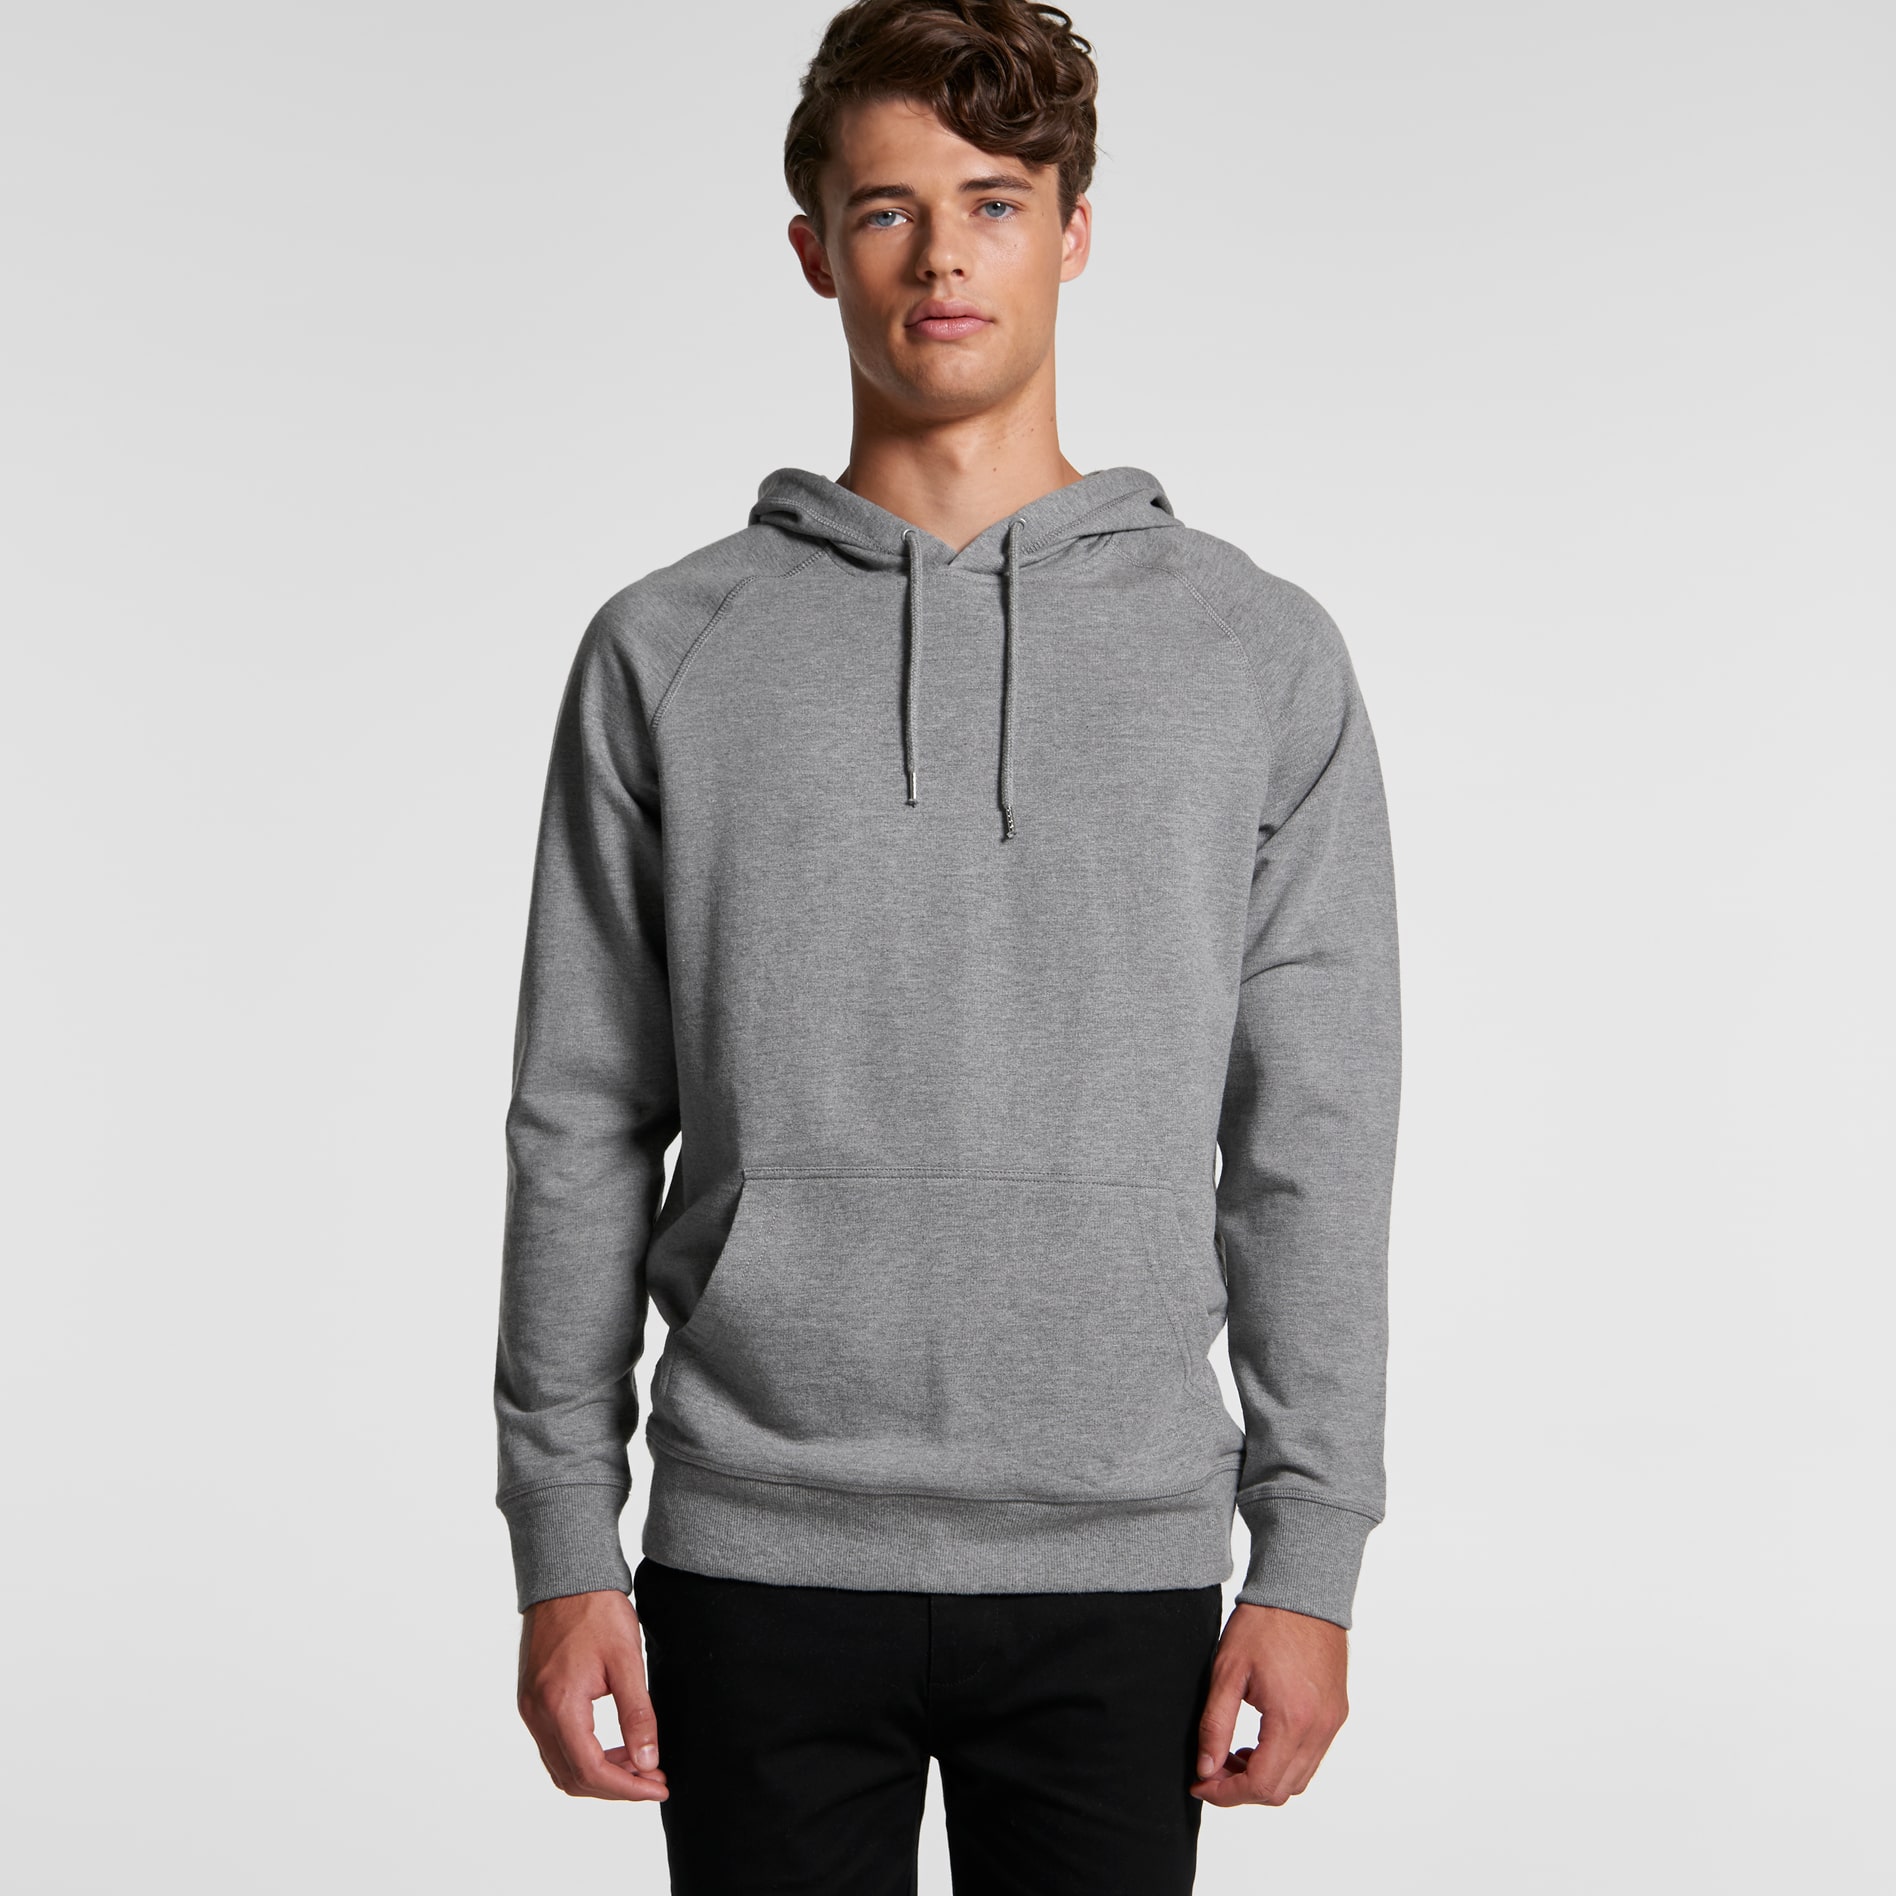 Best hoodies for men to personalise: which one's perfect for your team? - 5120 premium hood front